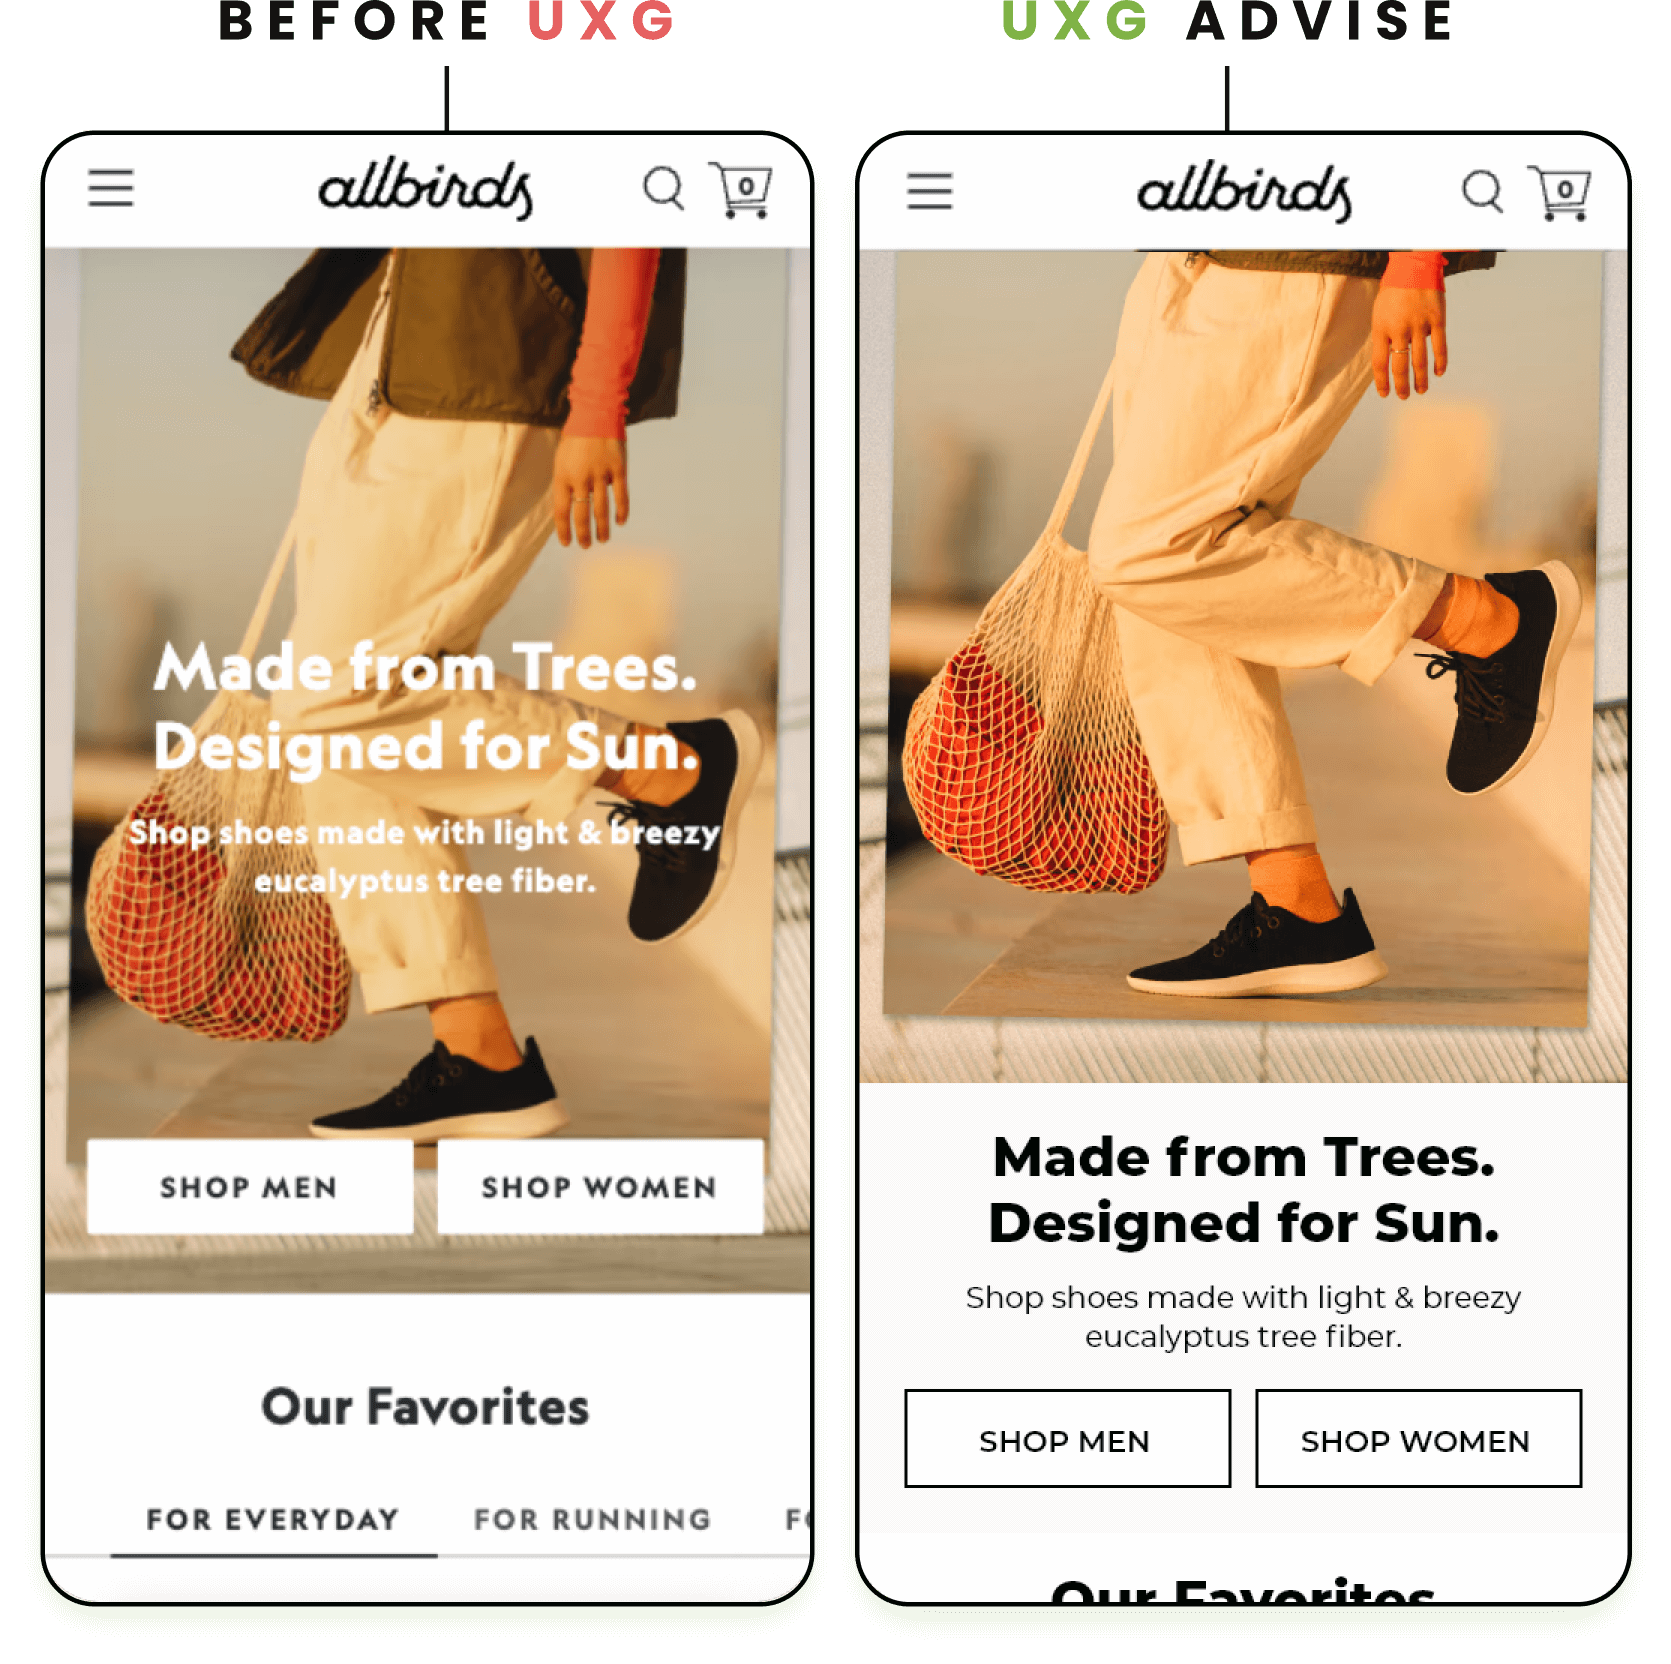 CRO Before and After UX Growth - Allbirds